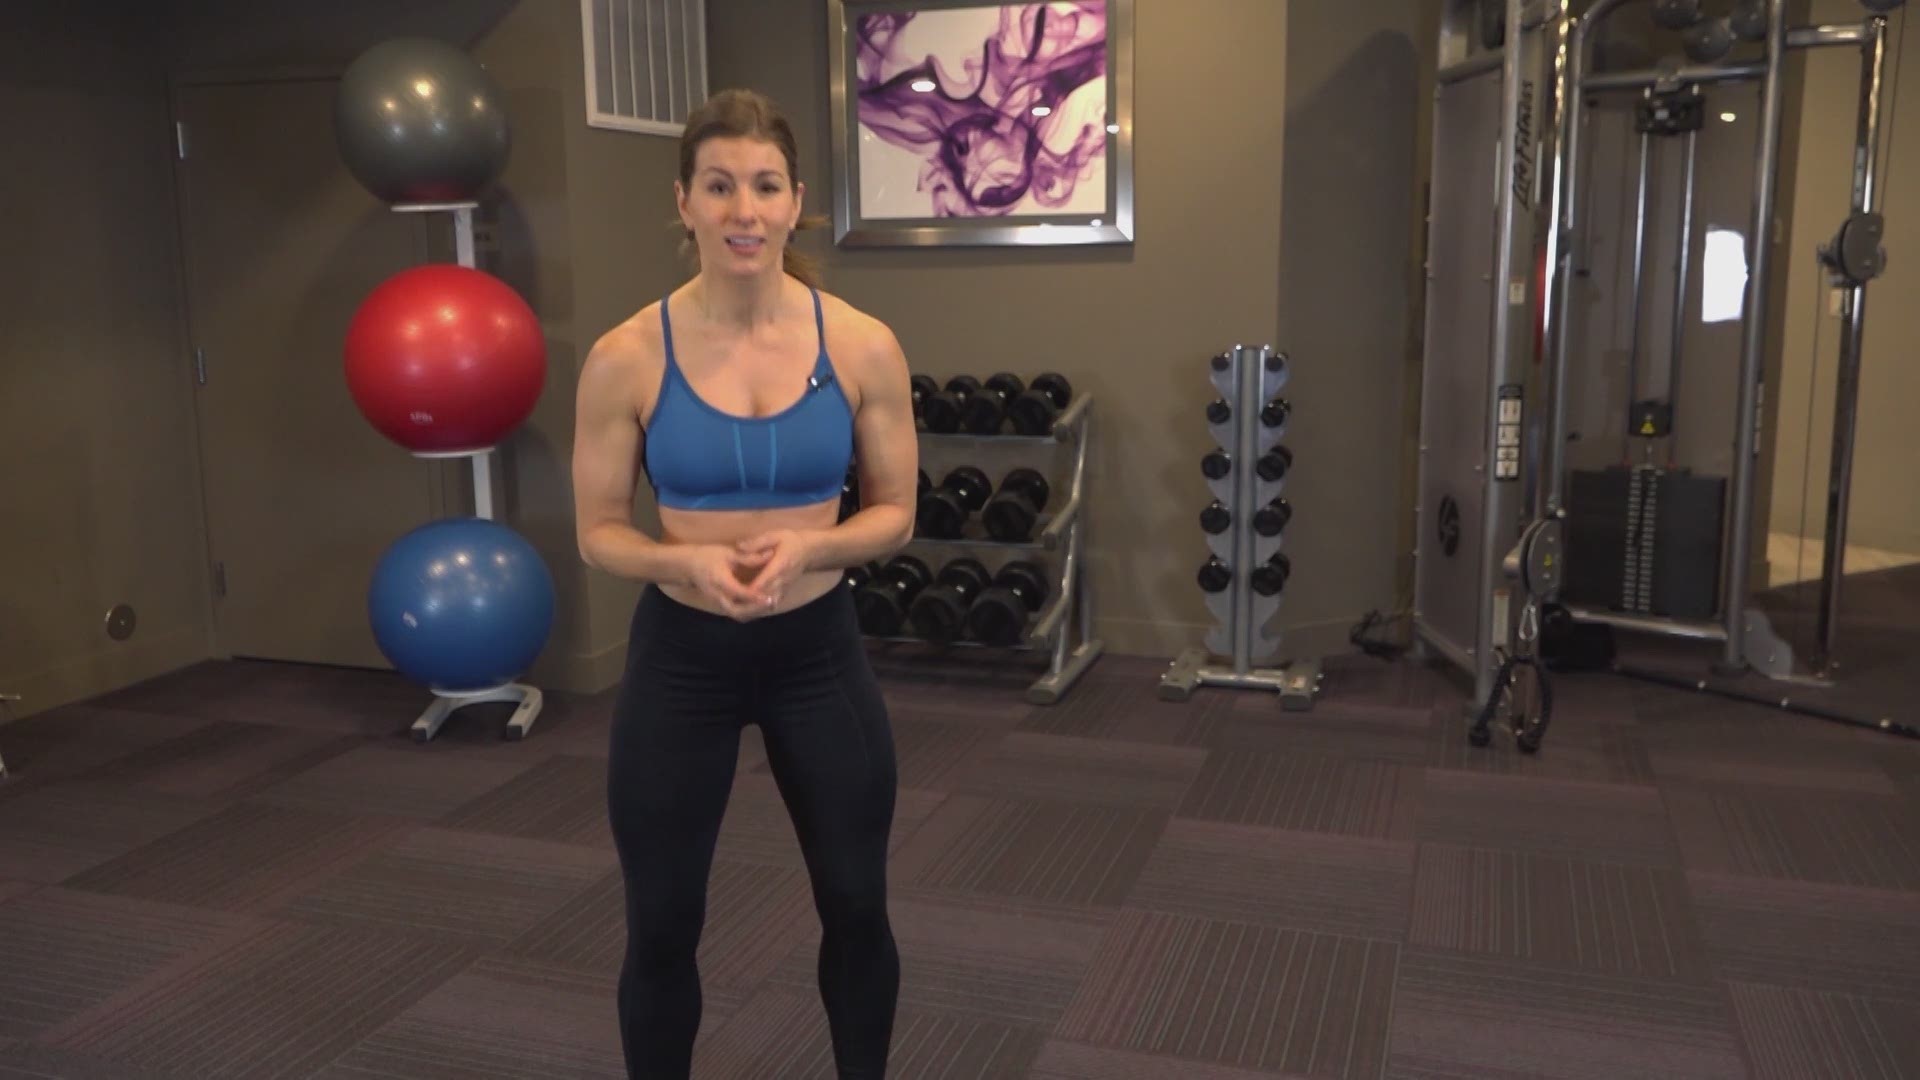 Jen Widerstrom is putting fun back into fitness with some workouts you can do with your kids! This one is for all of those busy mom's out there. #FitnessFriday